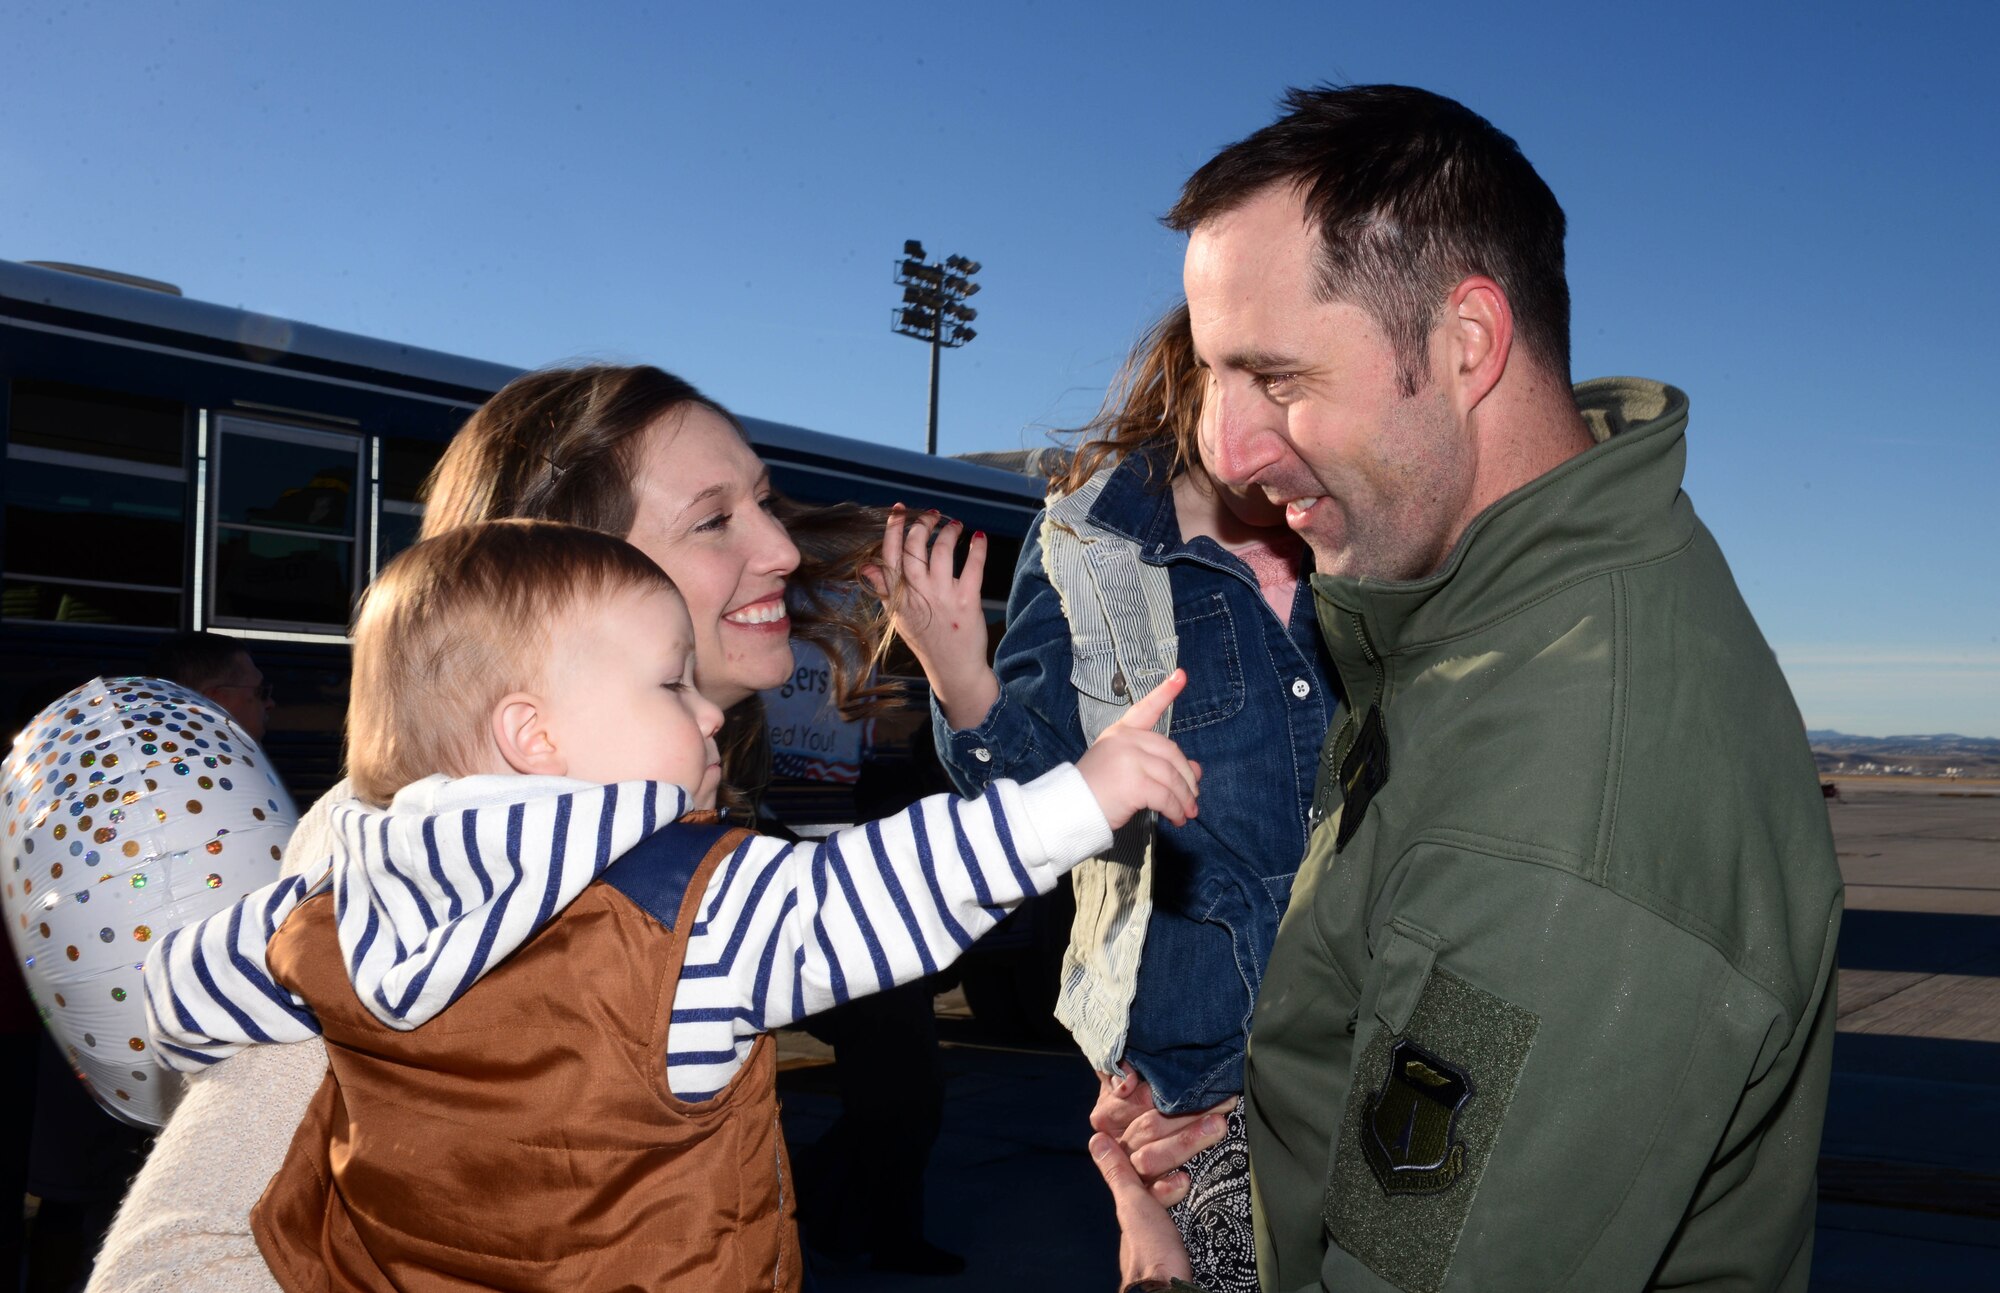 Capt. Lance, a weapons system officer assigned to the 37th Bomb Squadron, sees his family for the first time in over six months during a redeployment at Ellsworth Air Force Base, S.D., Jan. 24, 2018. B-1 bomber aircrews conducted sorties close to South Korea’s norther border as part of the U.S. Pacific Command’s Continuous Bomber Presence mission. (U.S. Air Force photo by Airman 1st Class Donald Knechtel)